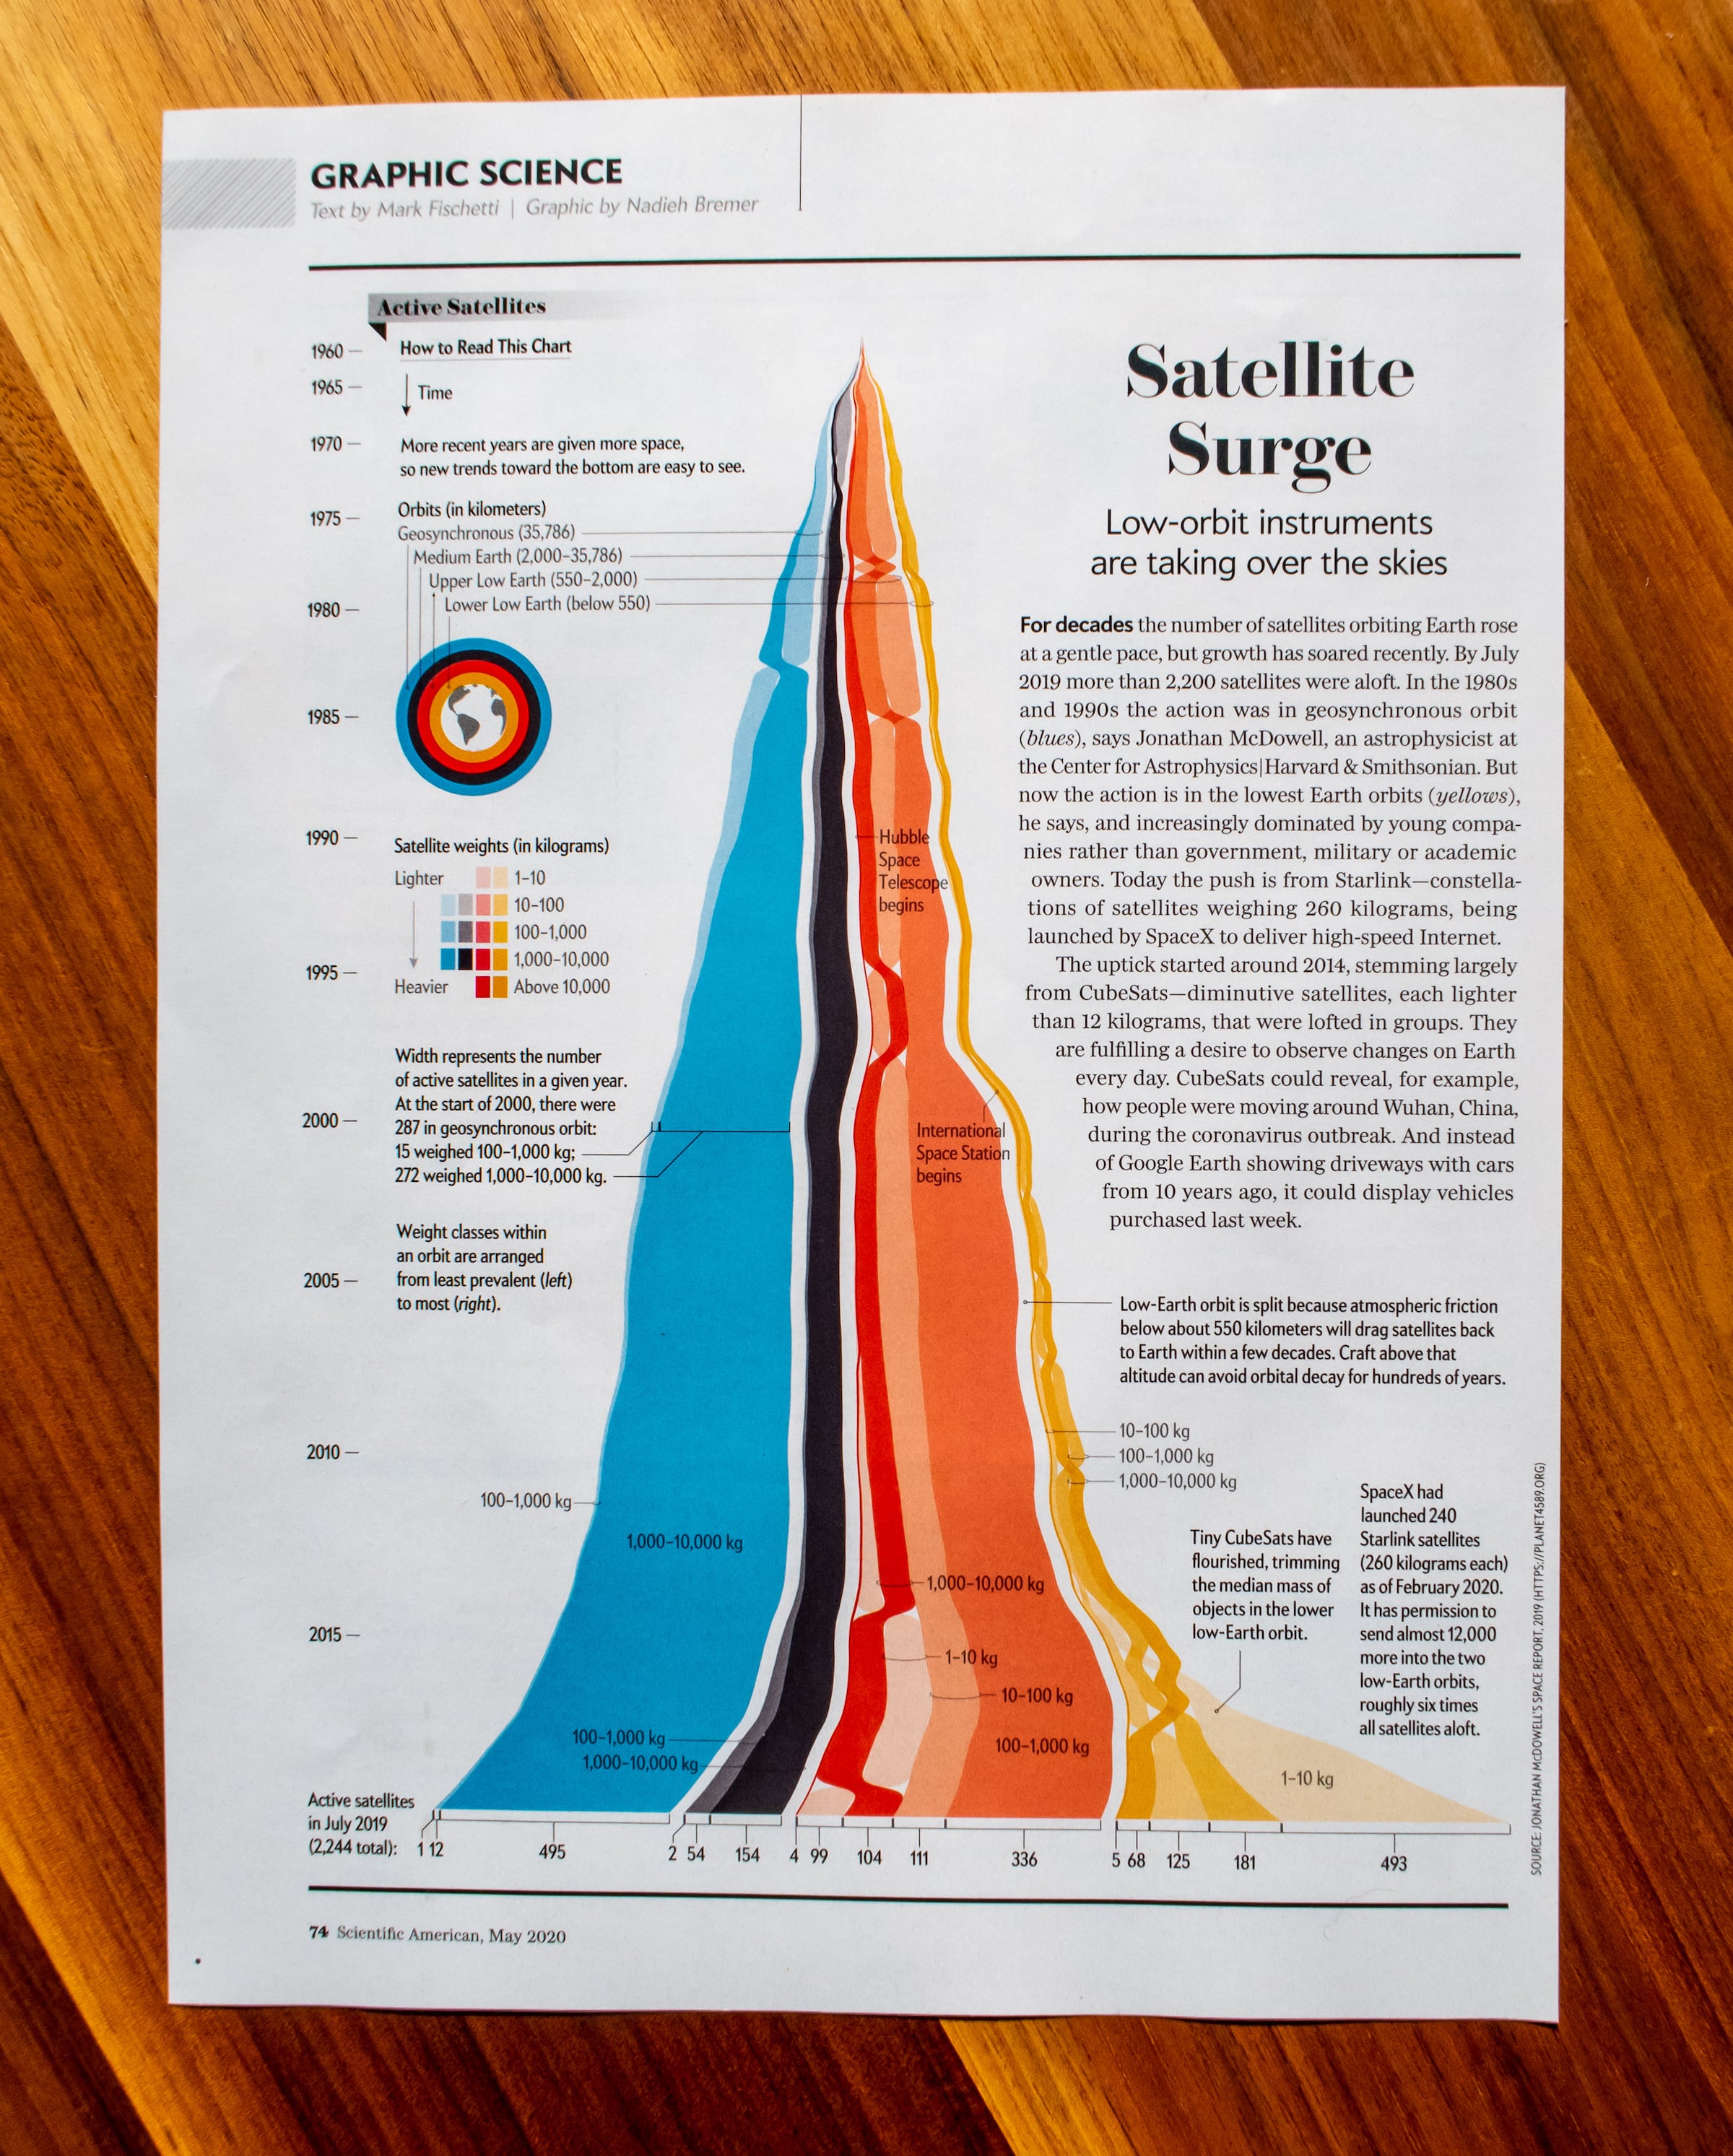 The full 'Graphic Science' spread in the May 2020 issue of Scientific American